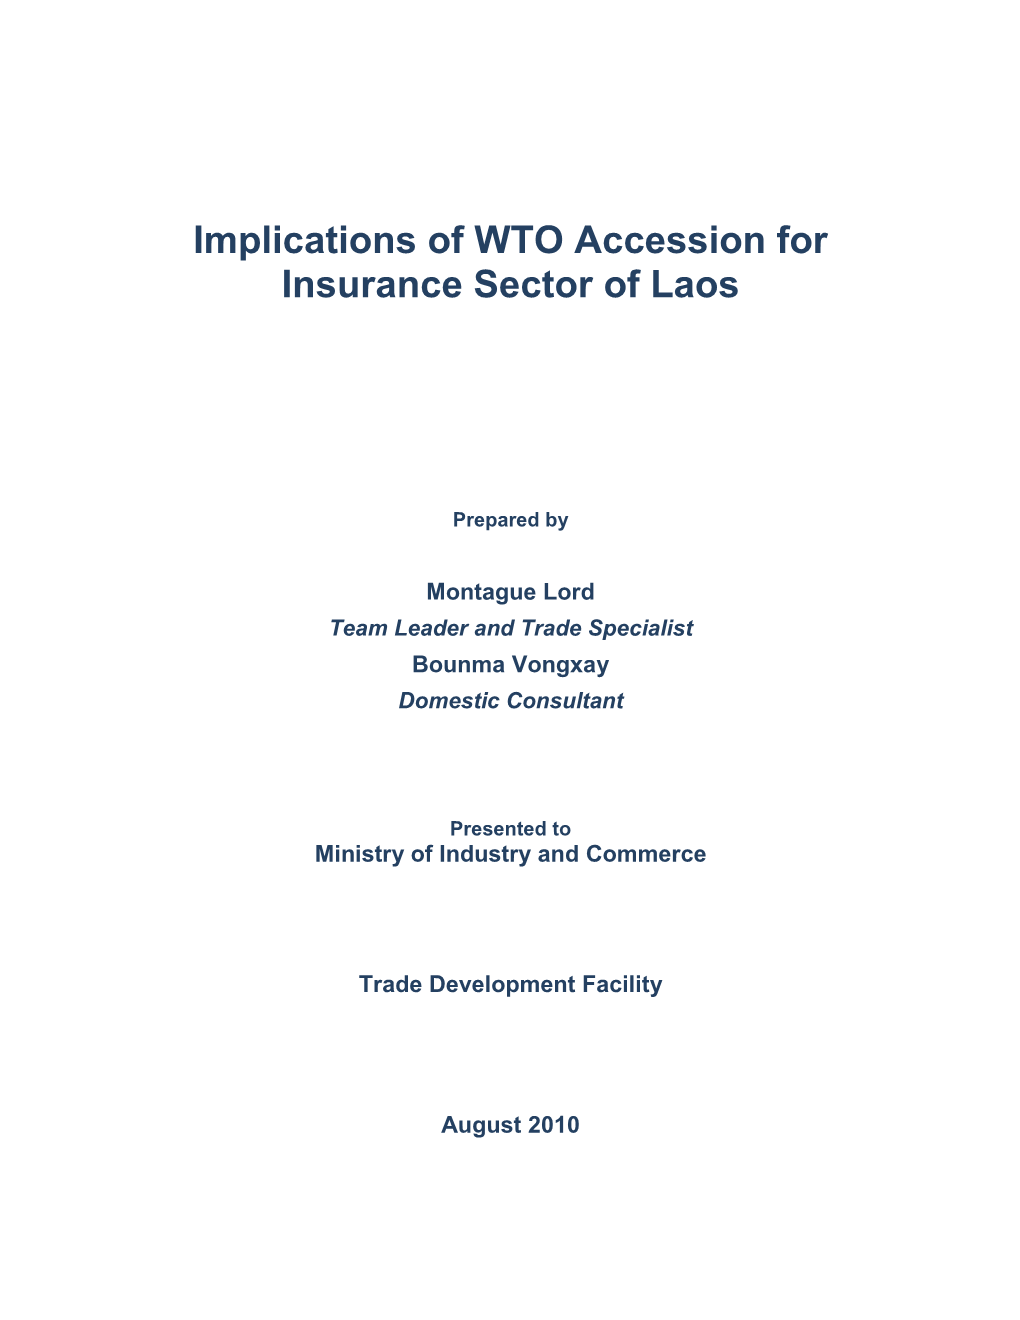 Implications of WTO Accession for Insurance Sector of Laos